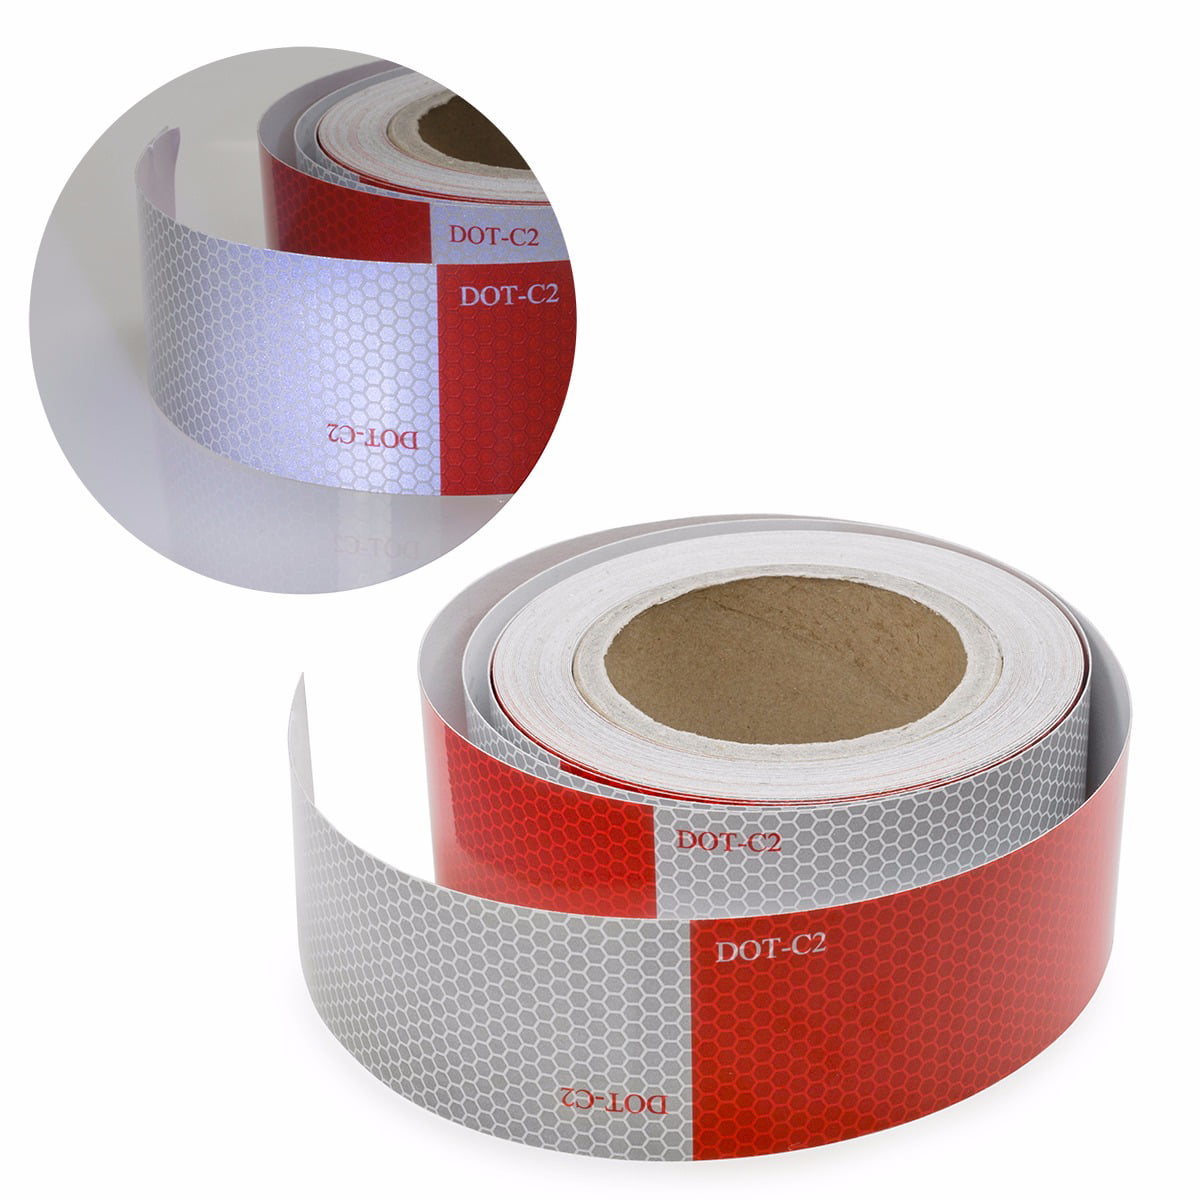 DOT-C2 Reflective Tape 2 Inch X 25 Foot Red And White Adhesive Sticker For Vehicles Trucks Trailers 